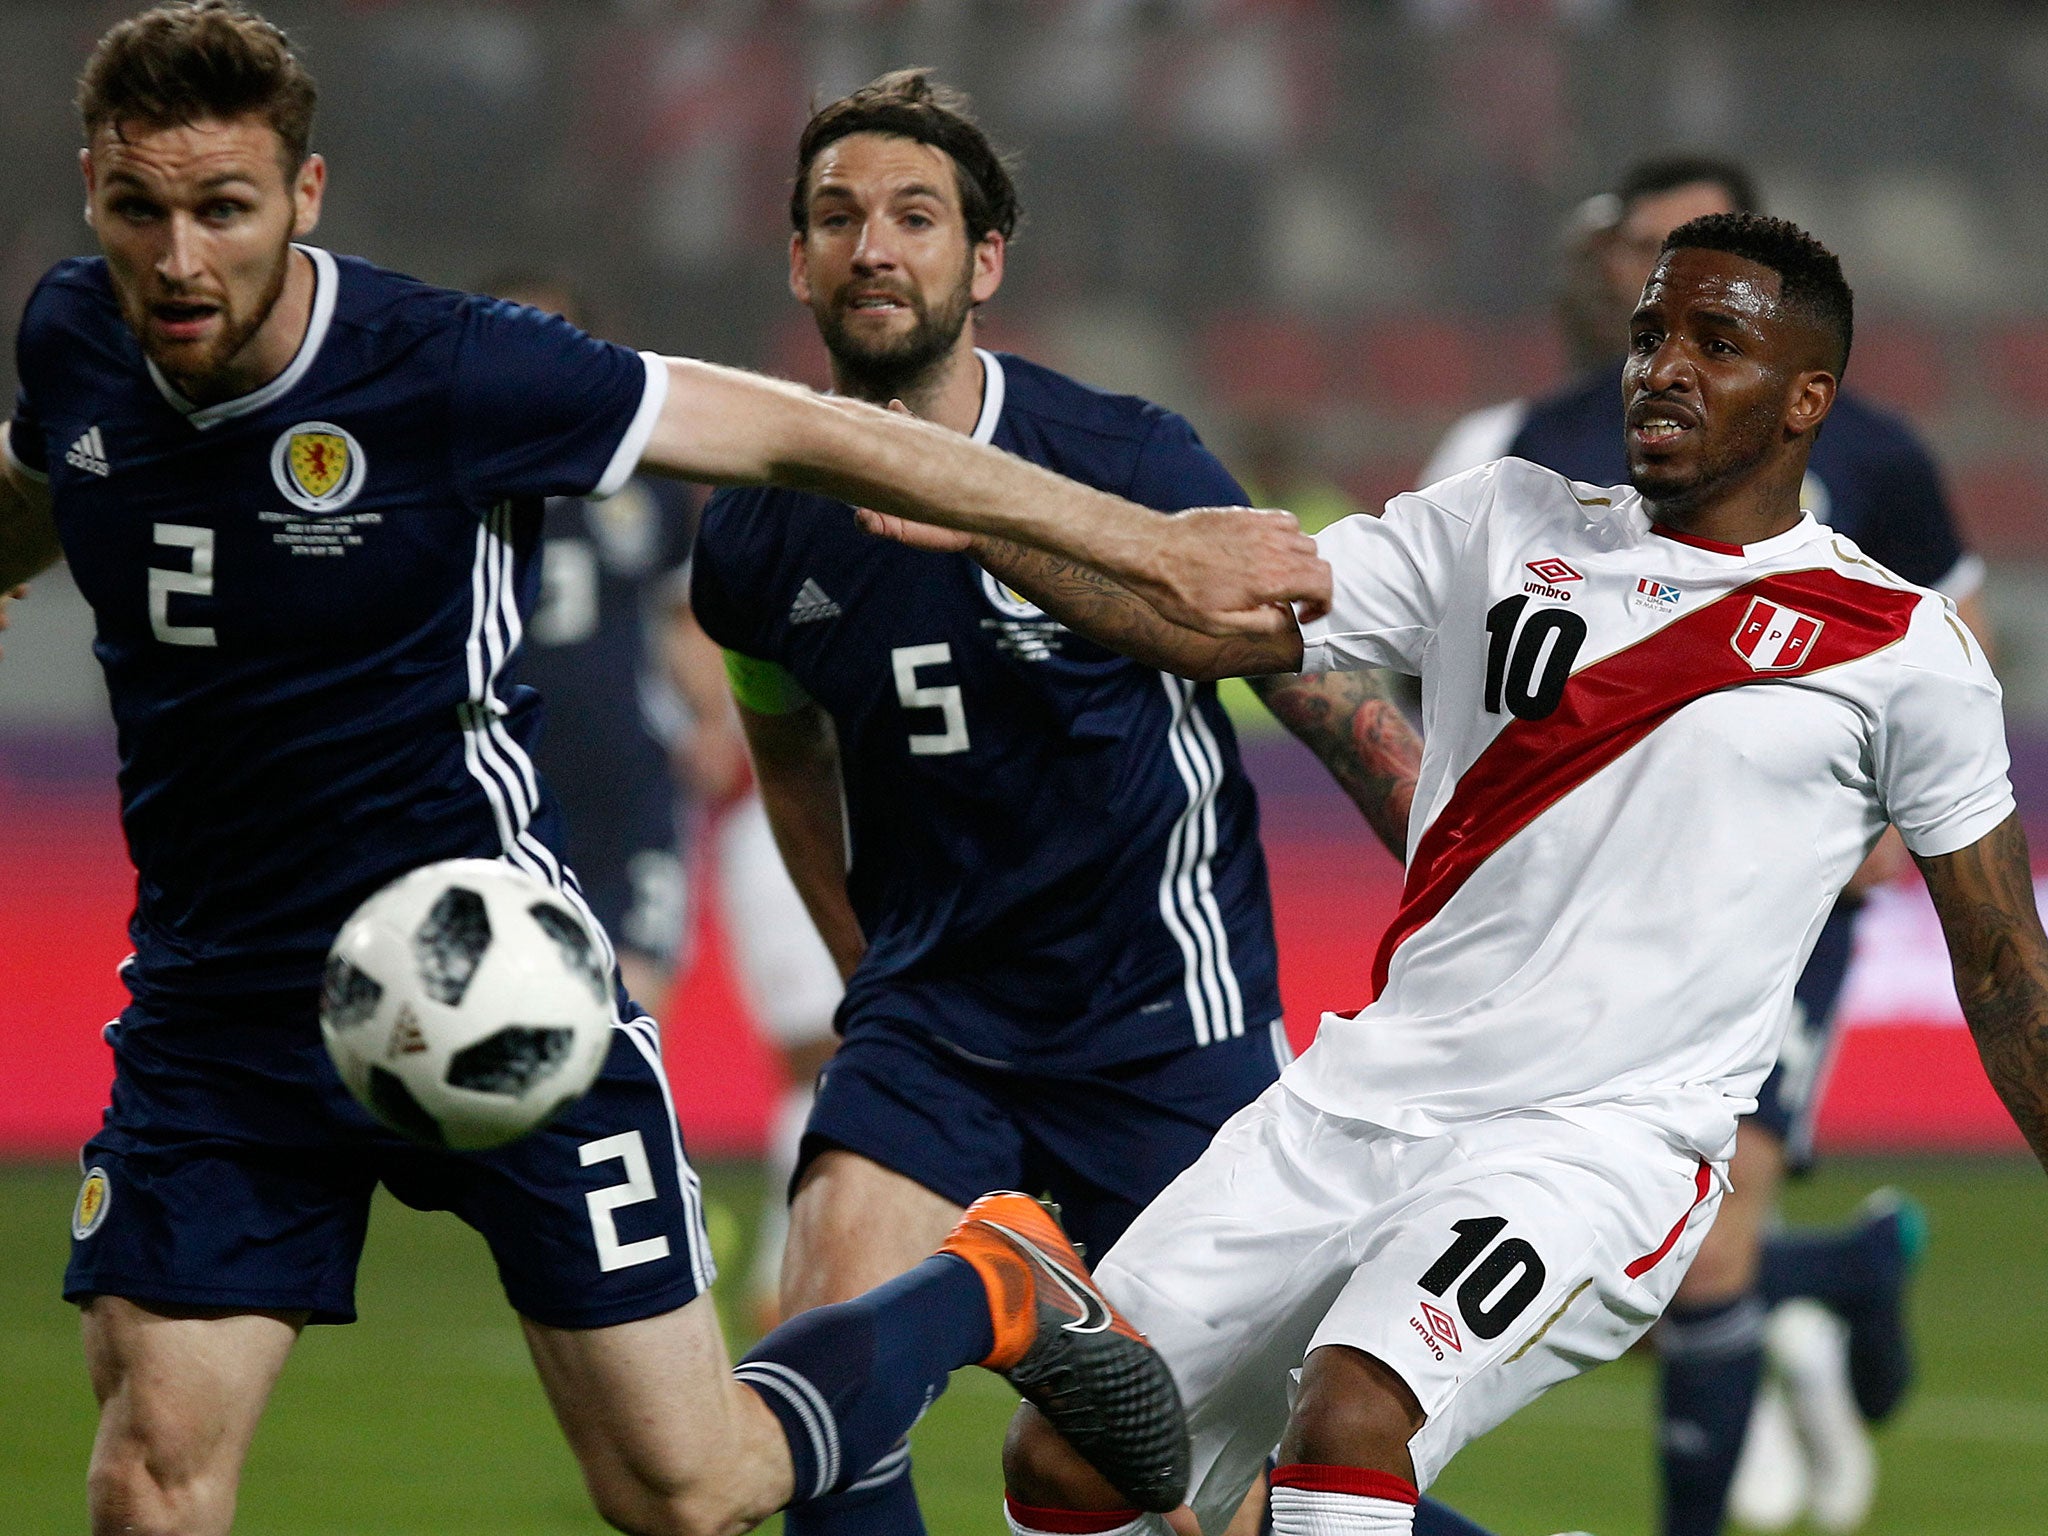 Farfan impressed for the hosts